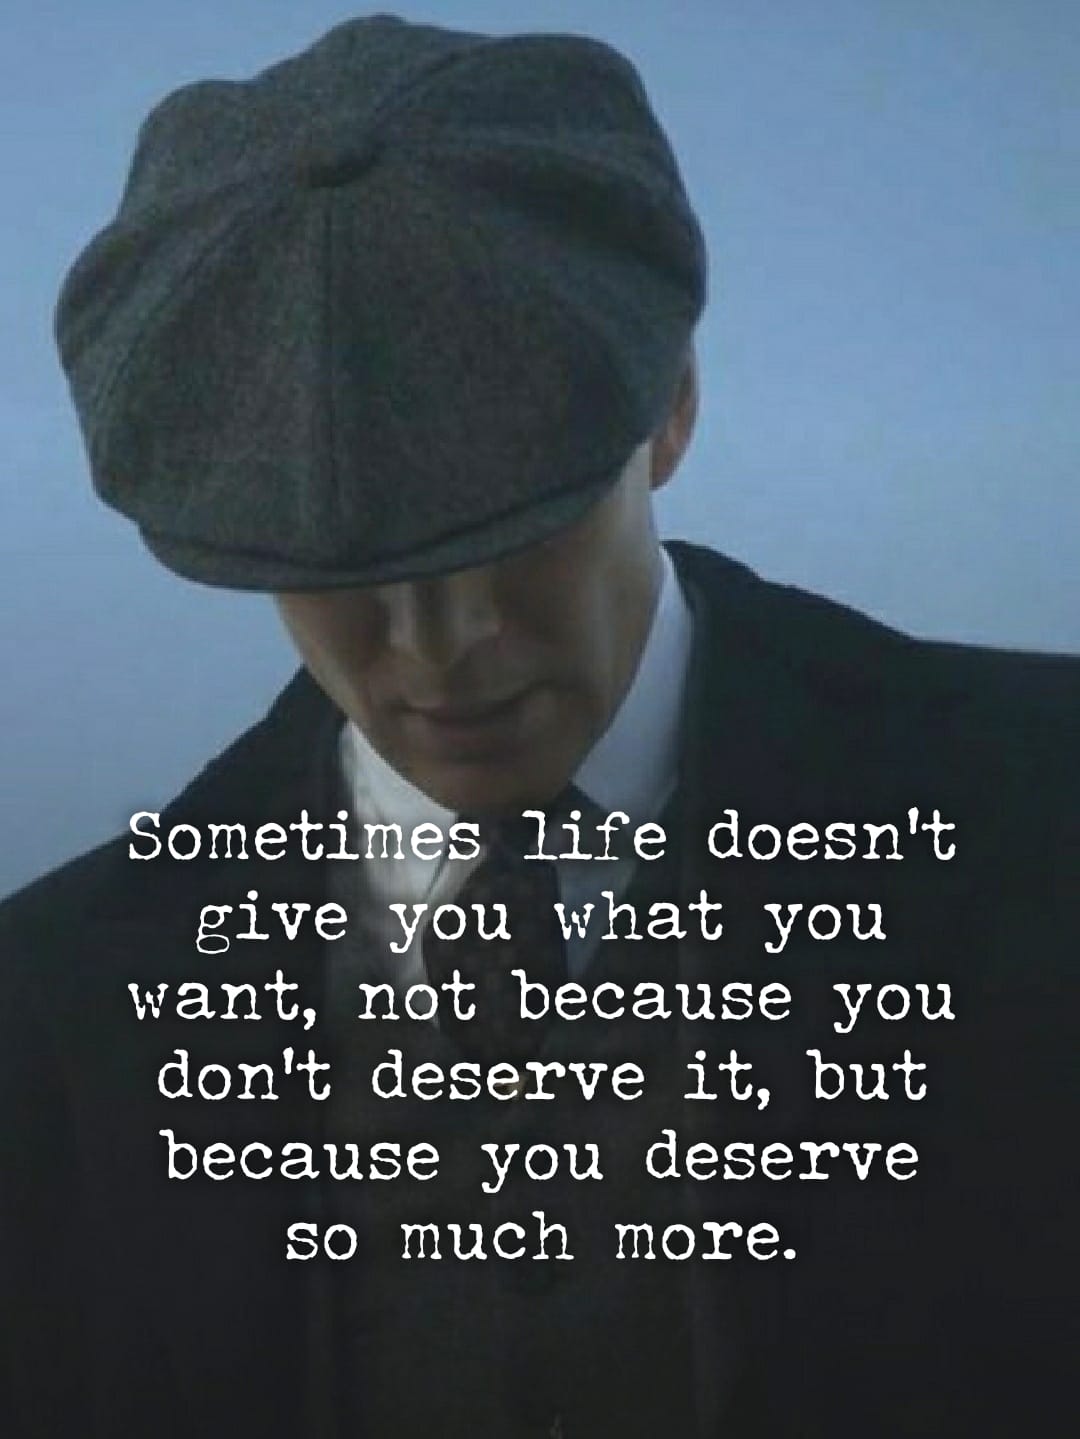 Sometimes life doesn’t give you what you want, not because you don’t deserve it, but because you deserve more.